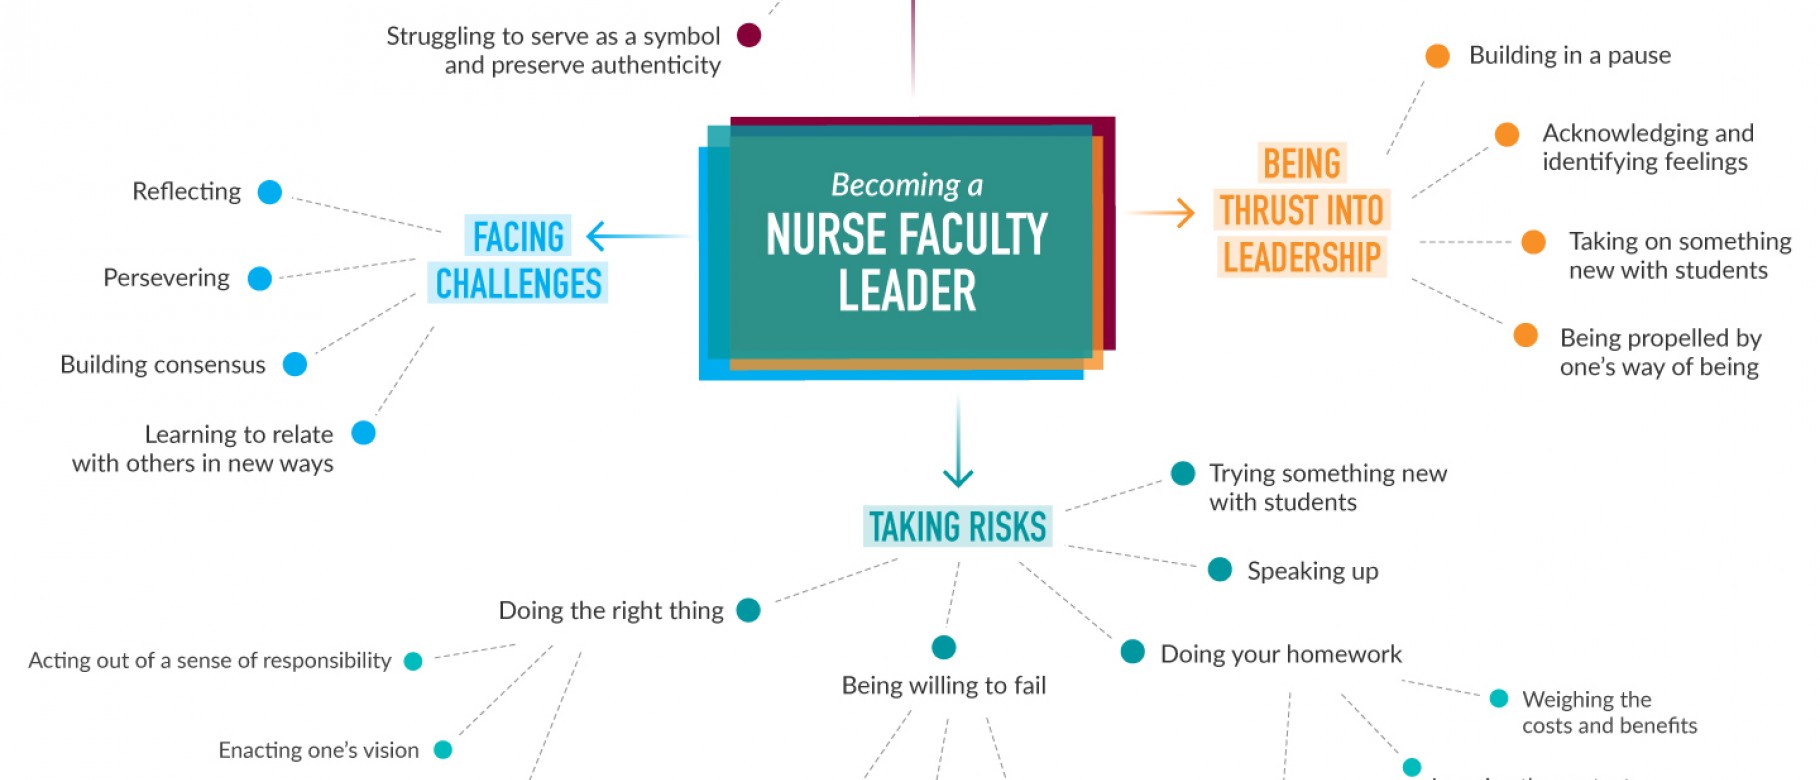 model from Pardue, K.T.; Young, P.K.; Horton-Deutsch, S.; Halstead, J., Pearsall, C. (2018). Becoming a nurse faculty leader: 